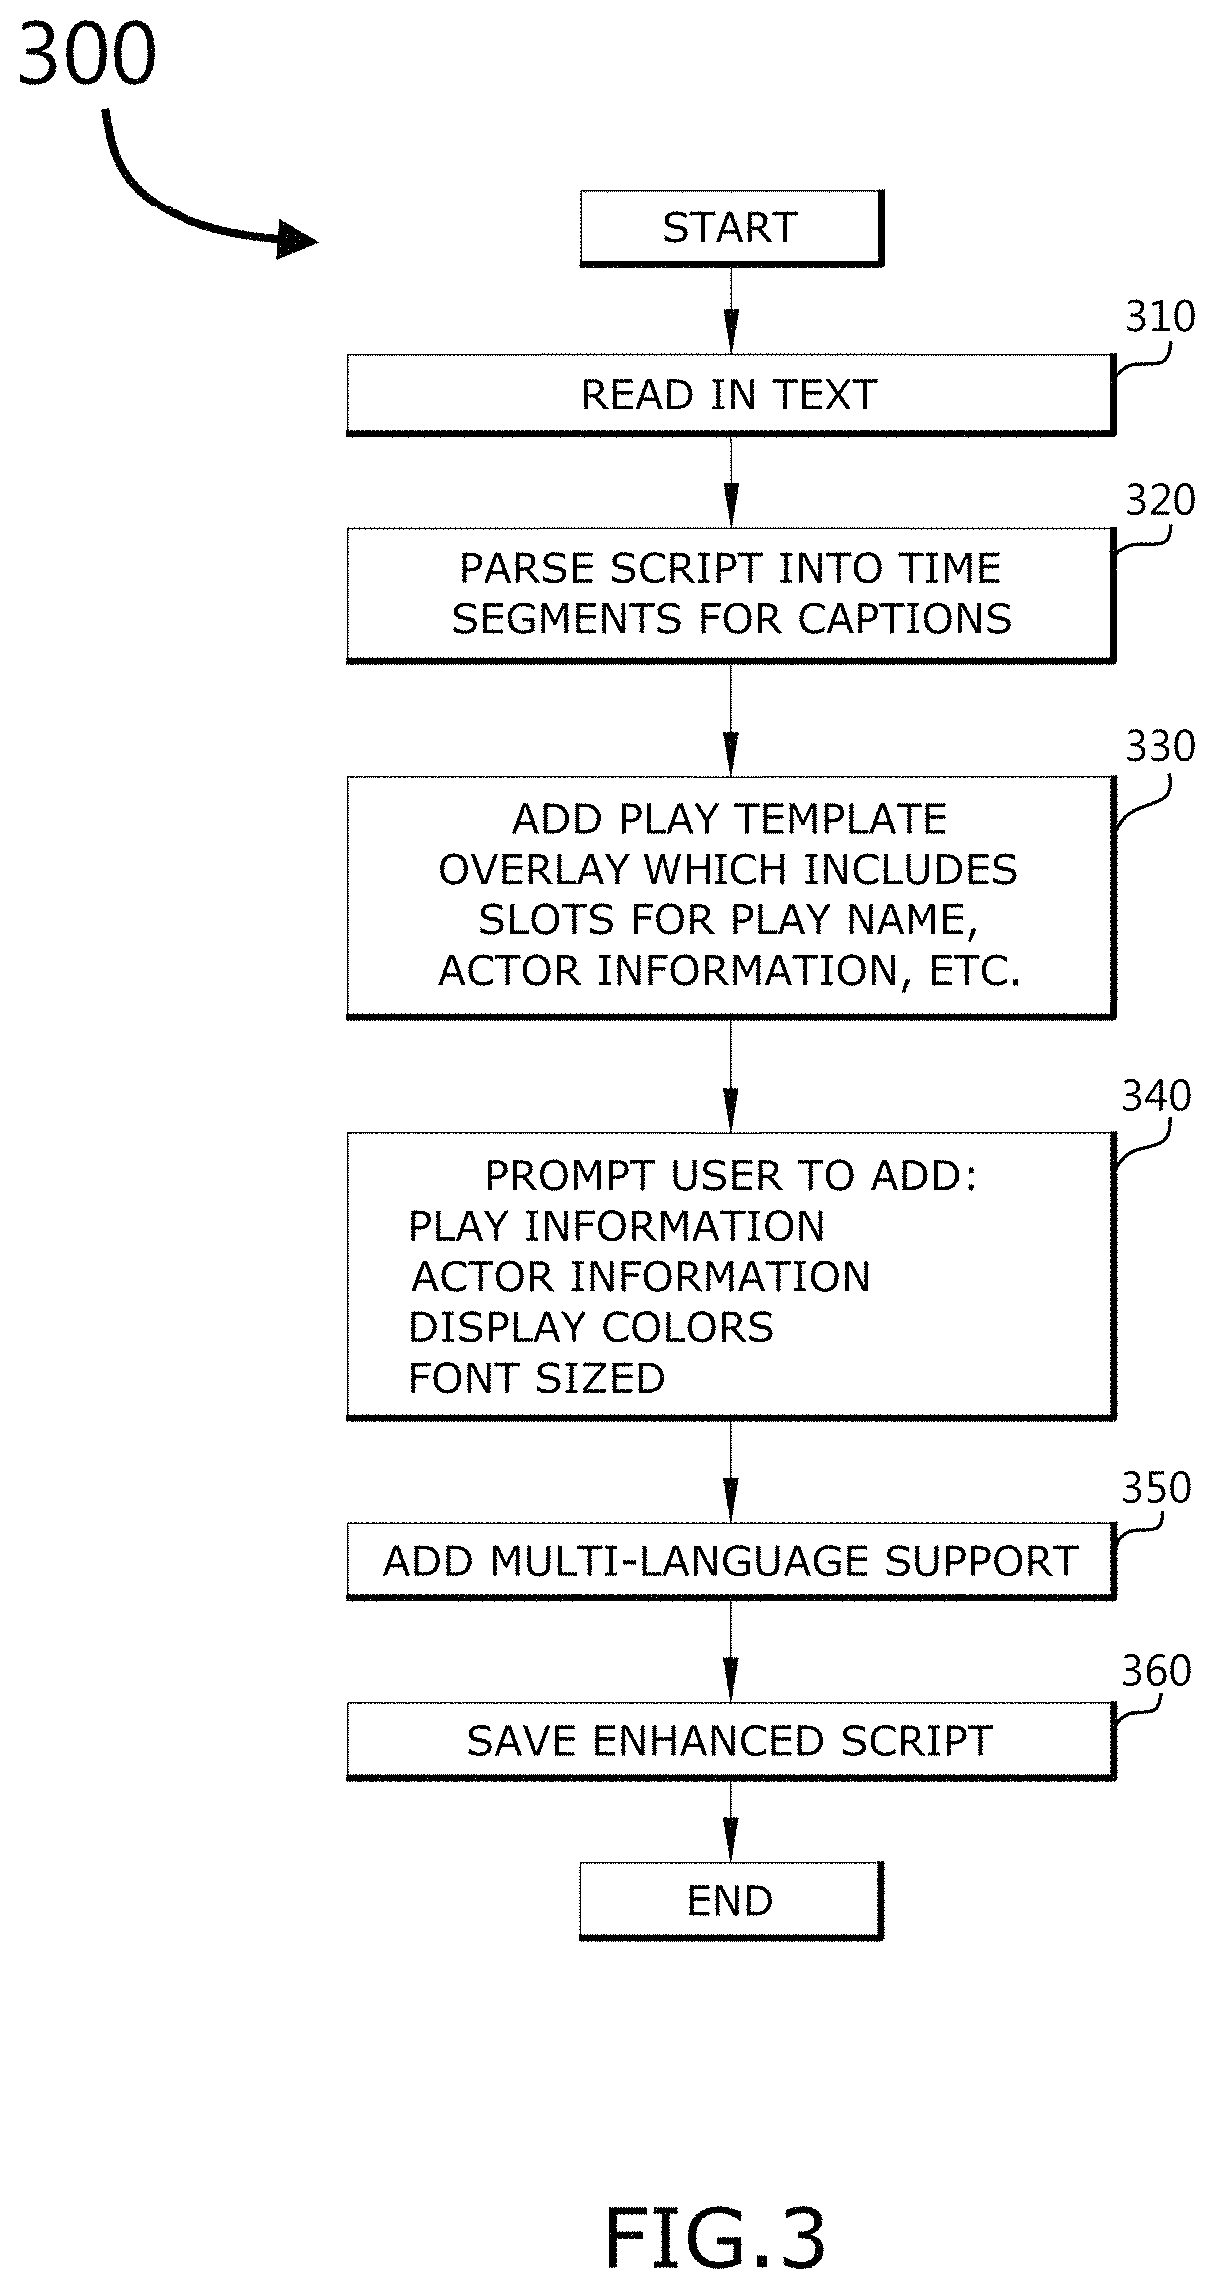 Synchronized captioning system and methods for synchronizing captioning with scripted live performances